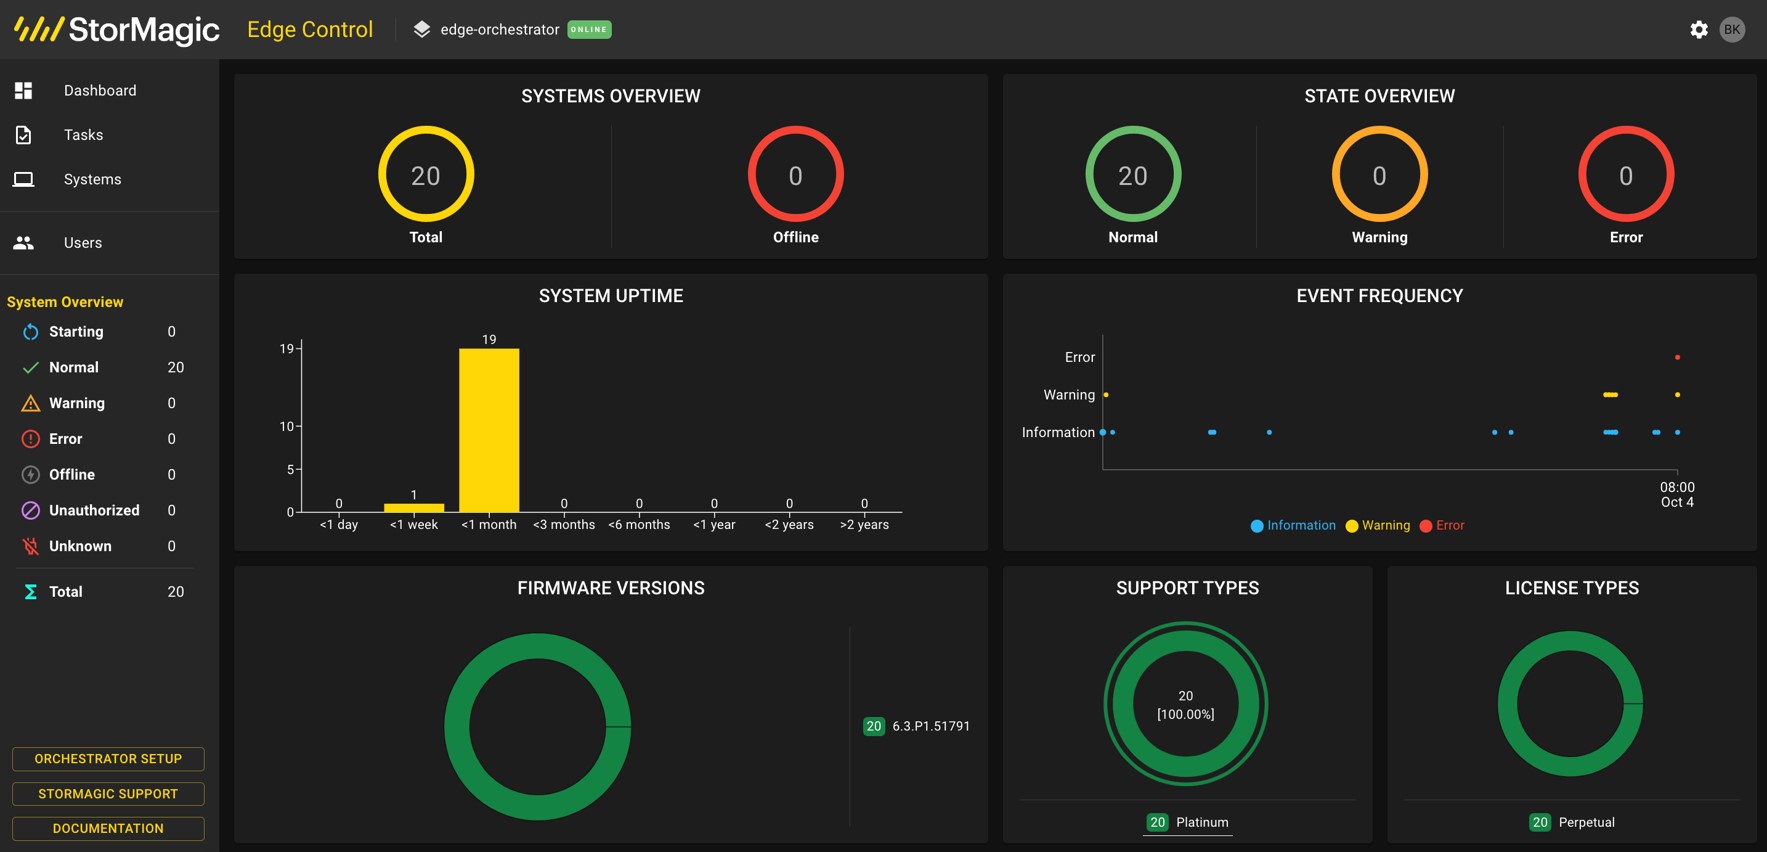 StorMagic SvSAN is managed through the Edge Control dashboard.